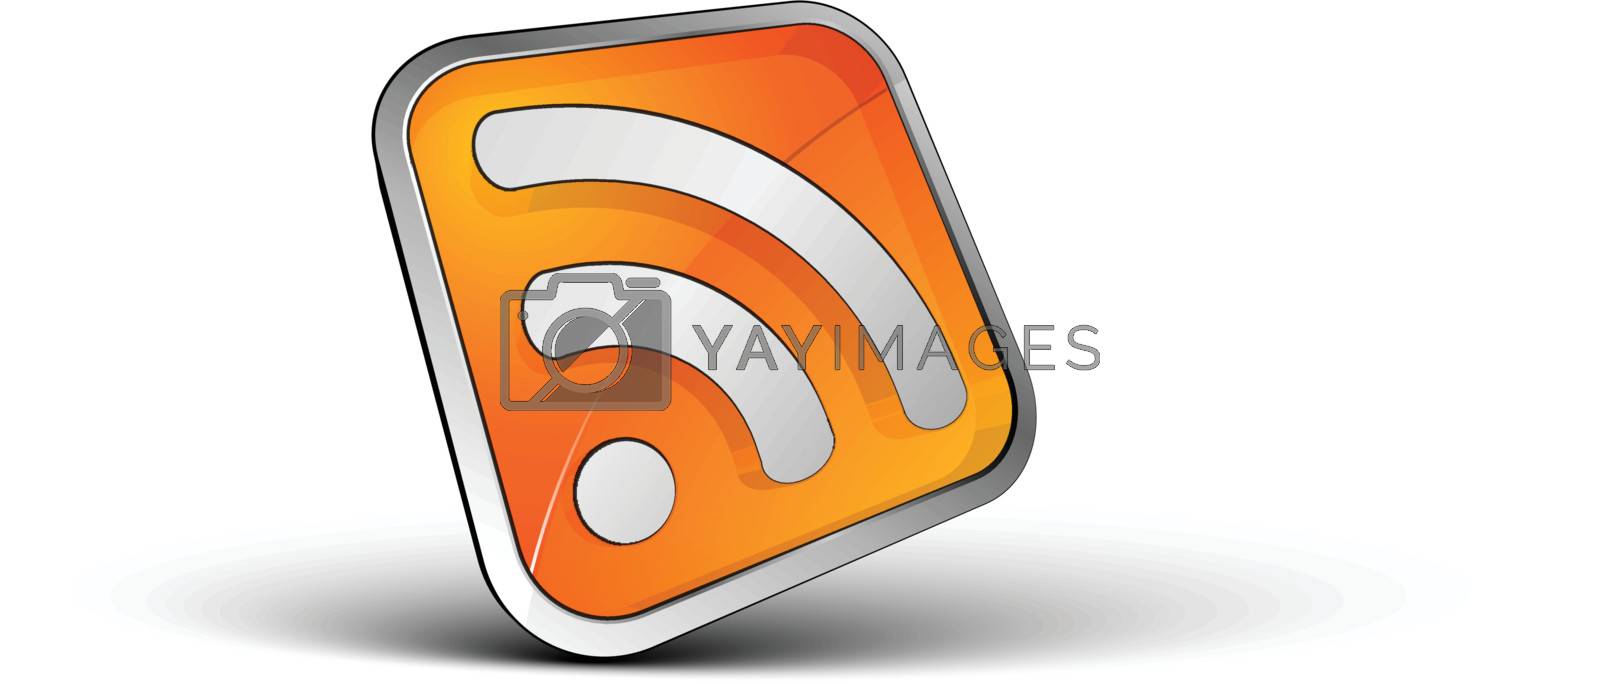 Royalty free image of rss icon by bagpereira